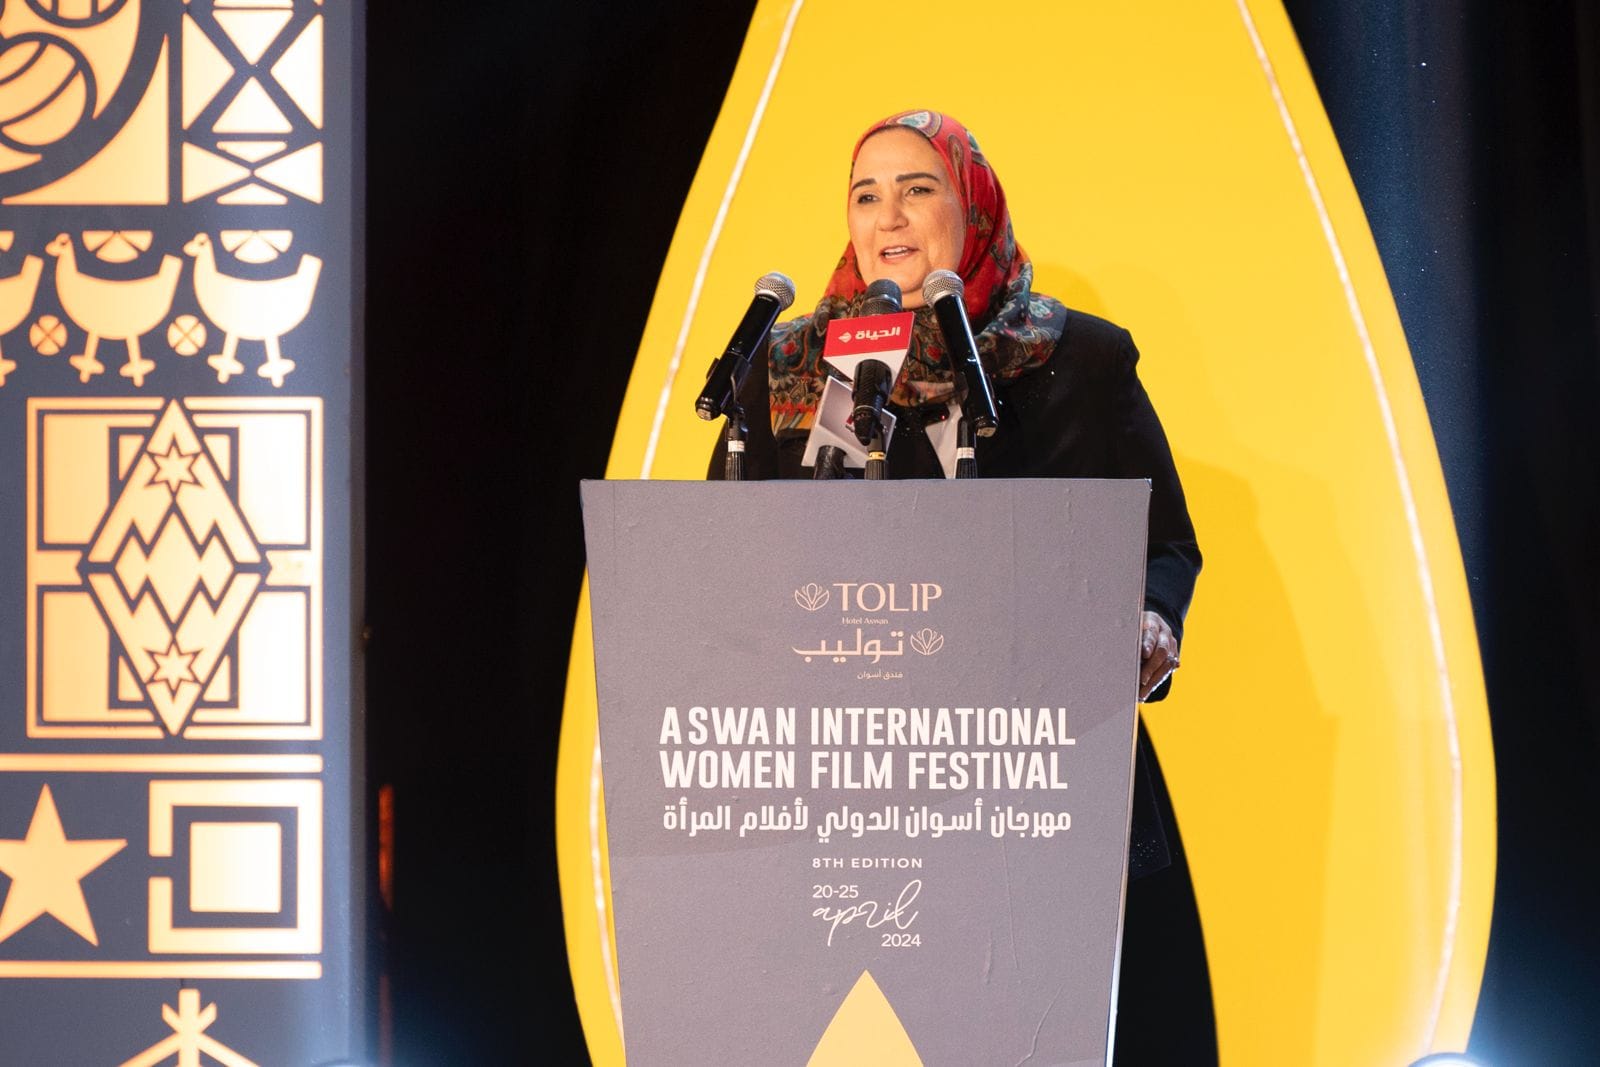 Minister of Solidarity: The Aswan Festival is one of the most important events to celebrate and honor creative women in all fields of the film industry